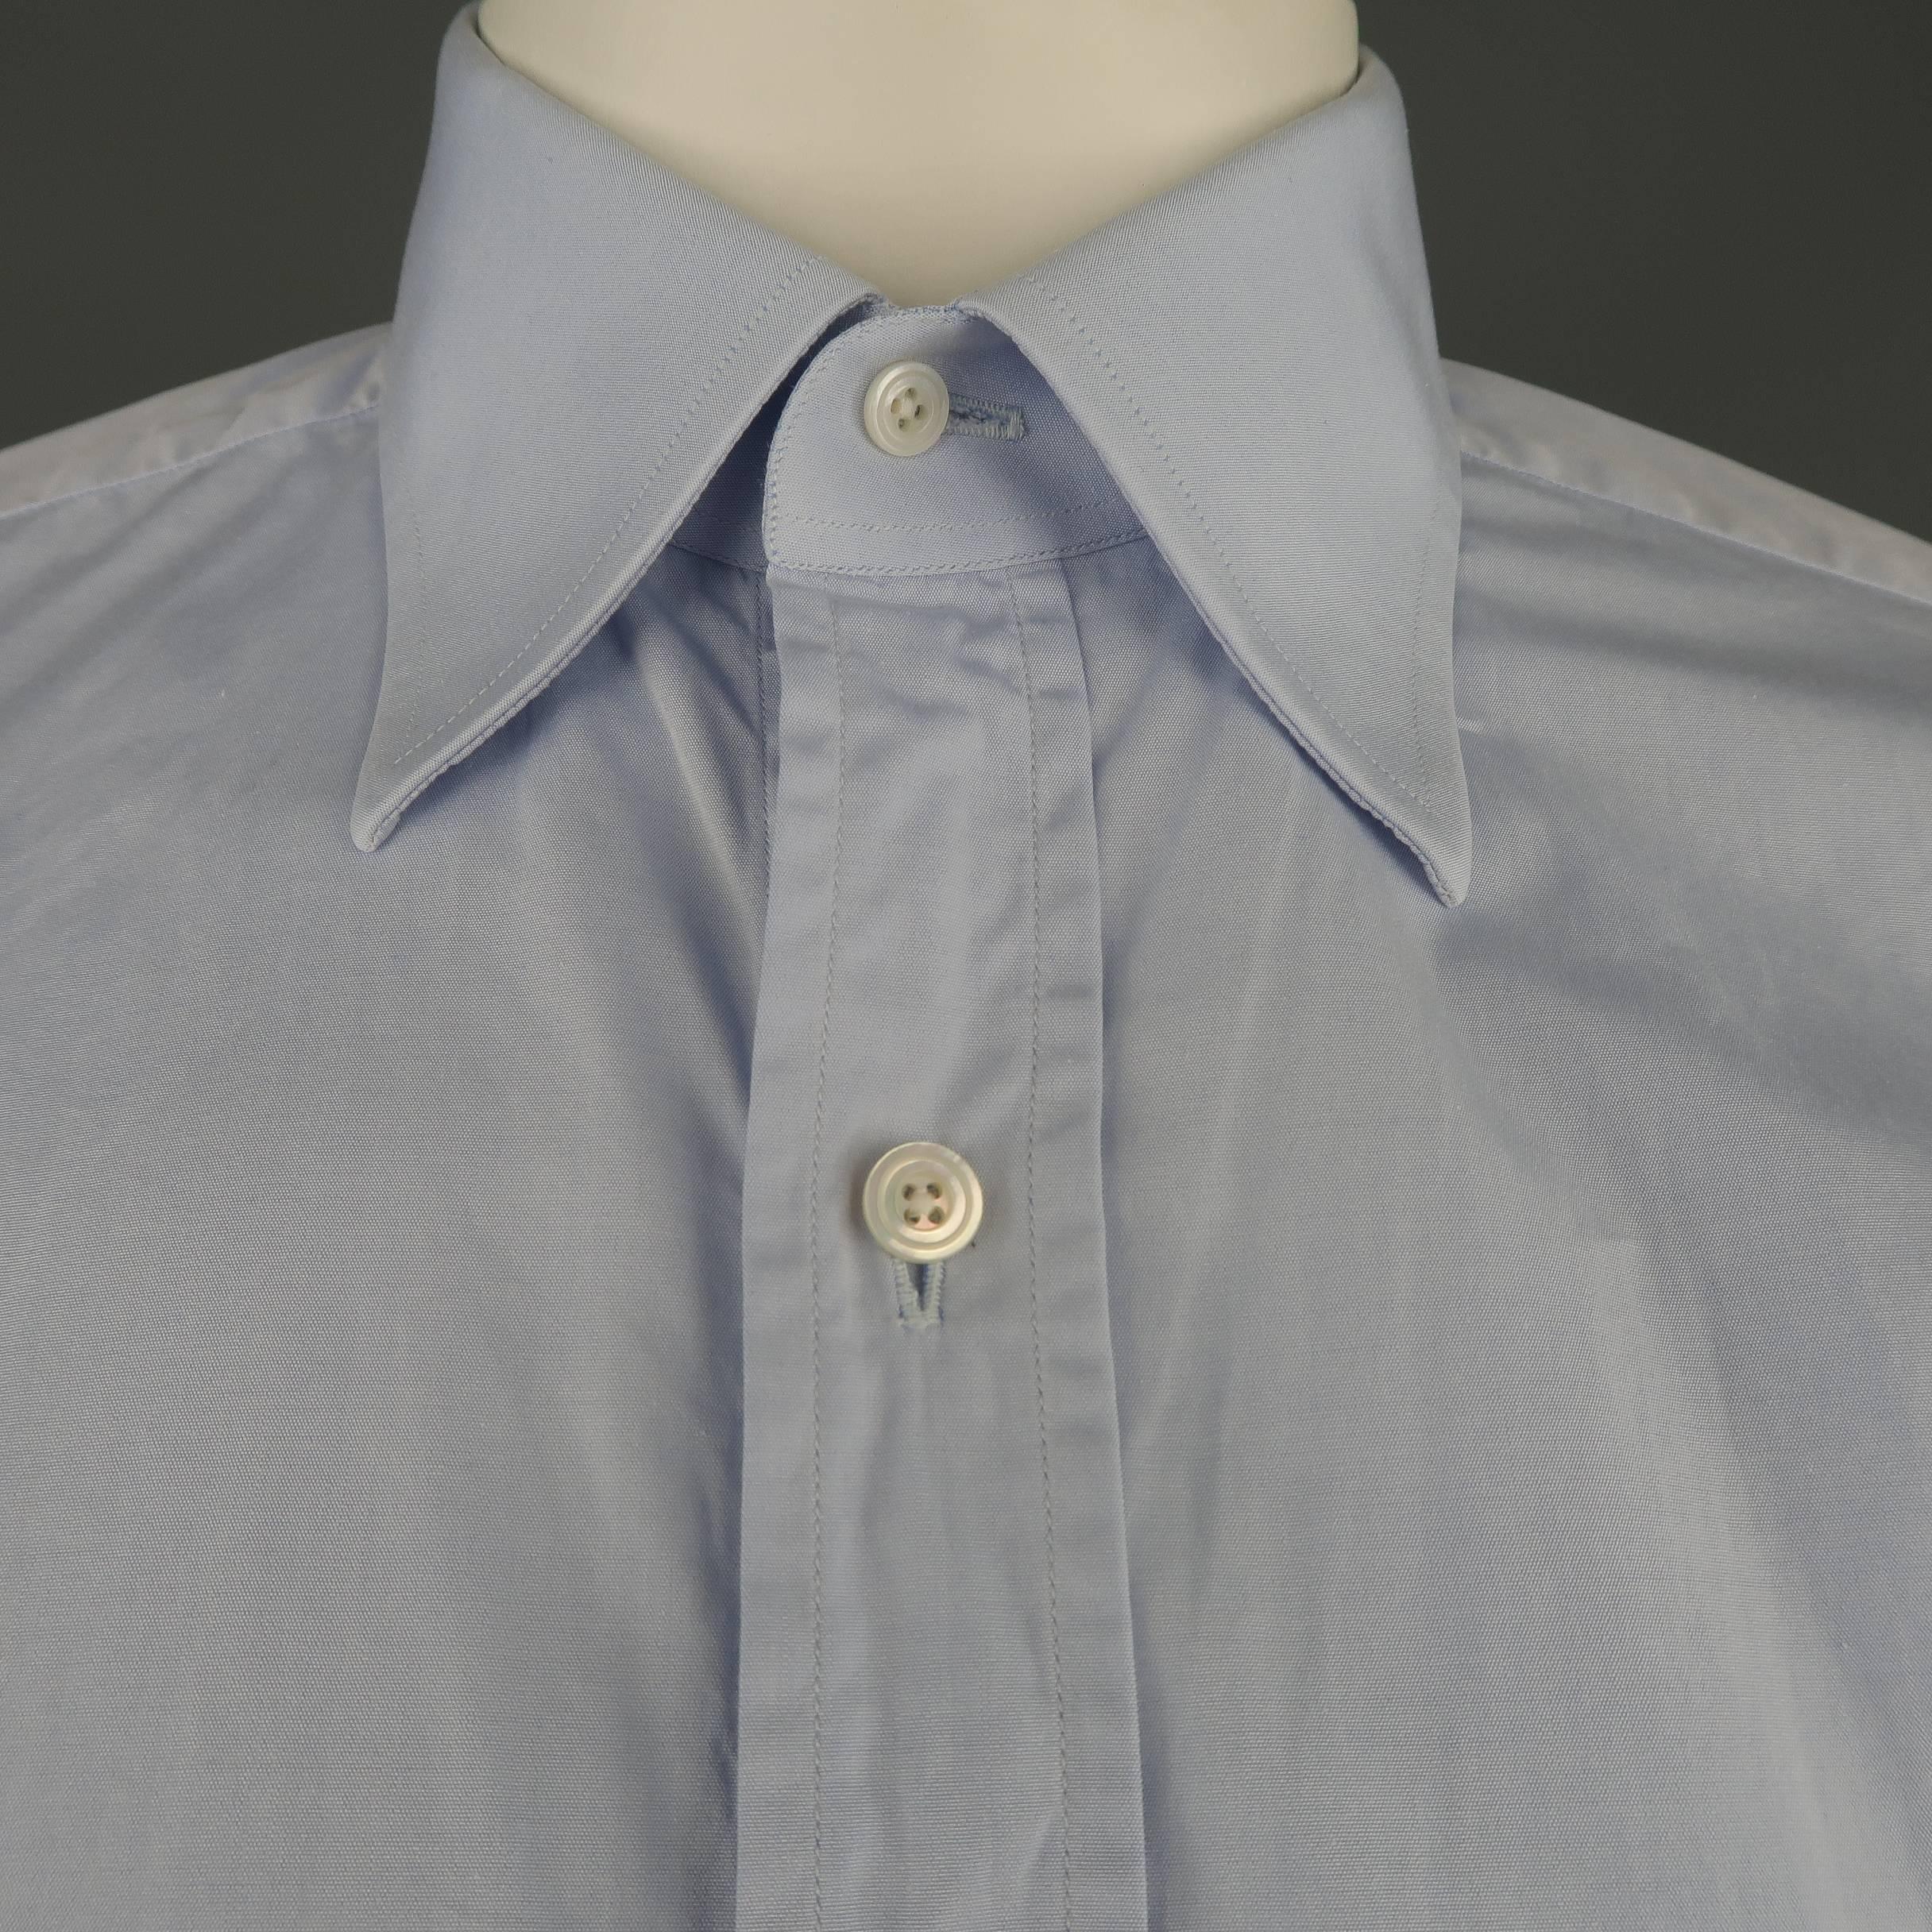 TOM FORD dress shirt comes in light blue cotton with a pointed collar and two button cuffs. Made in Switzerland.
 
Good Pre-Owned Condition.
Marked: 40  15 3/4
 
Measurements:
 
Shoulder: 17 in.
Chest: 44 in.
Sleeve: 26 in.
Length: 30 in.
